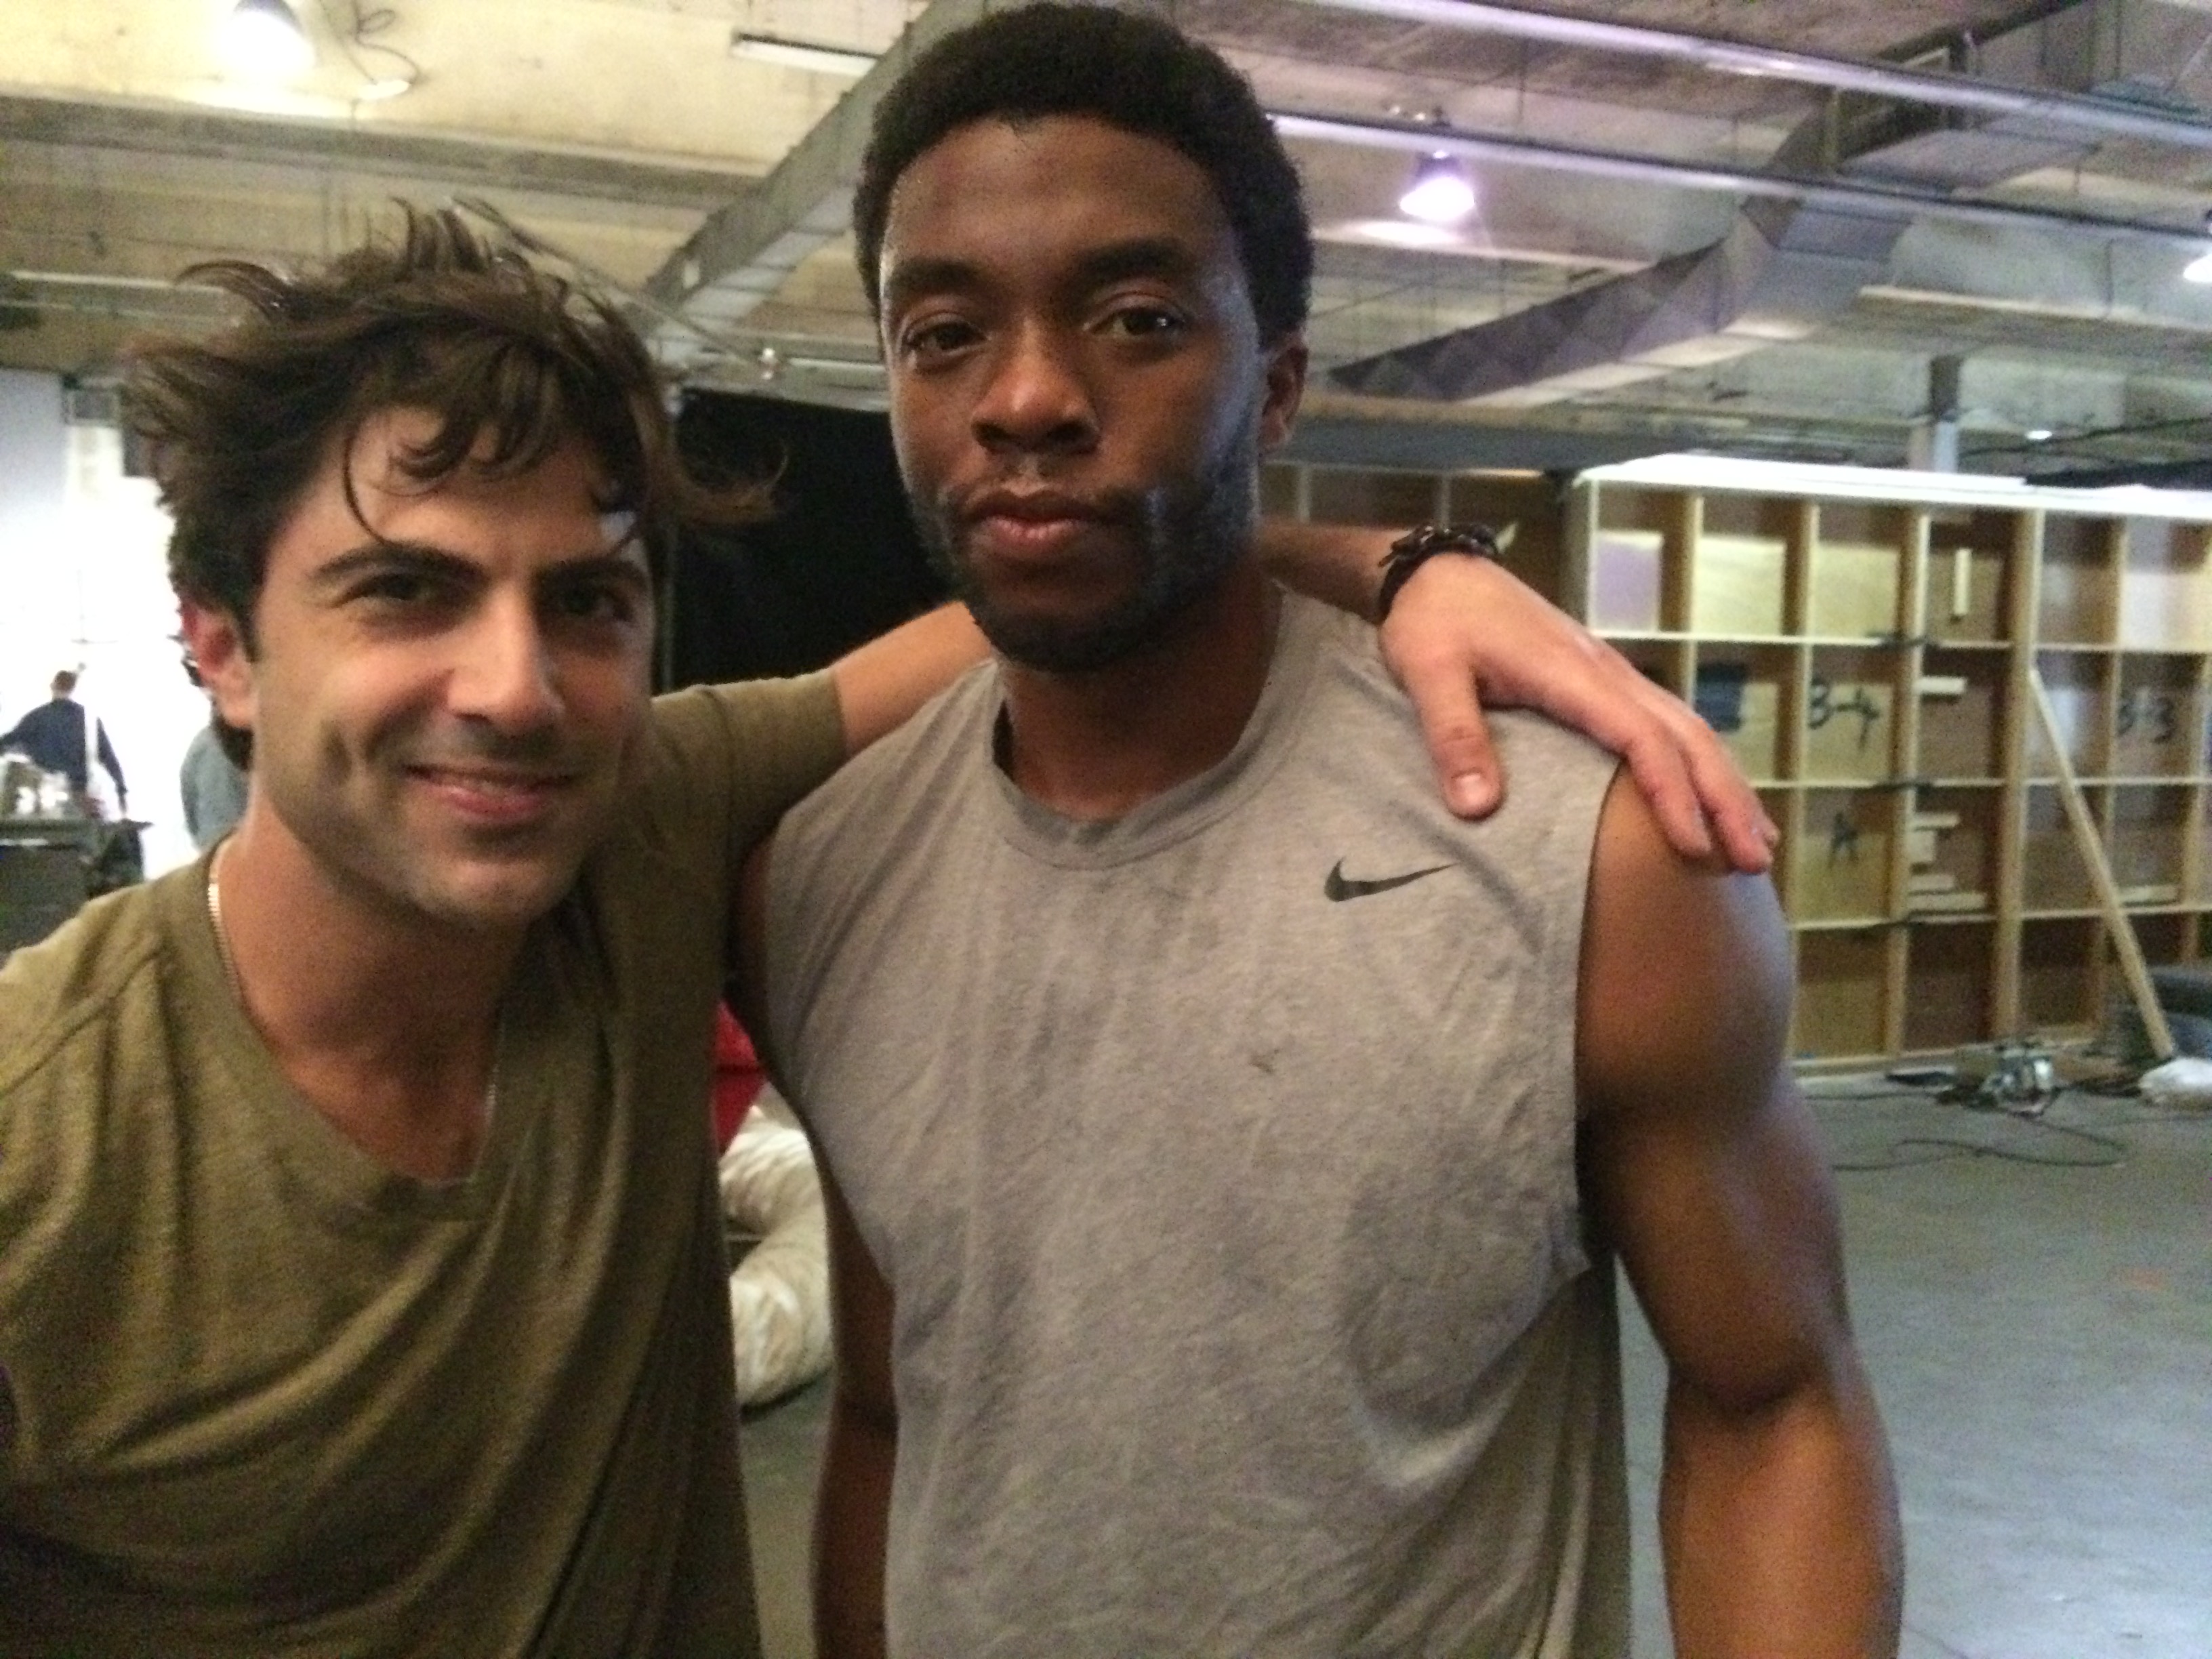 Lucan Melkonian and Chadwick Boseman, behind the scenes on Message from the King set